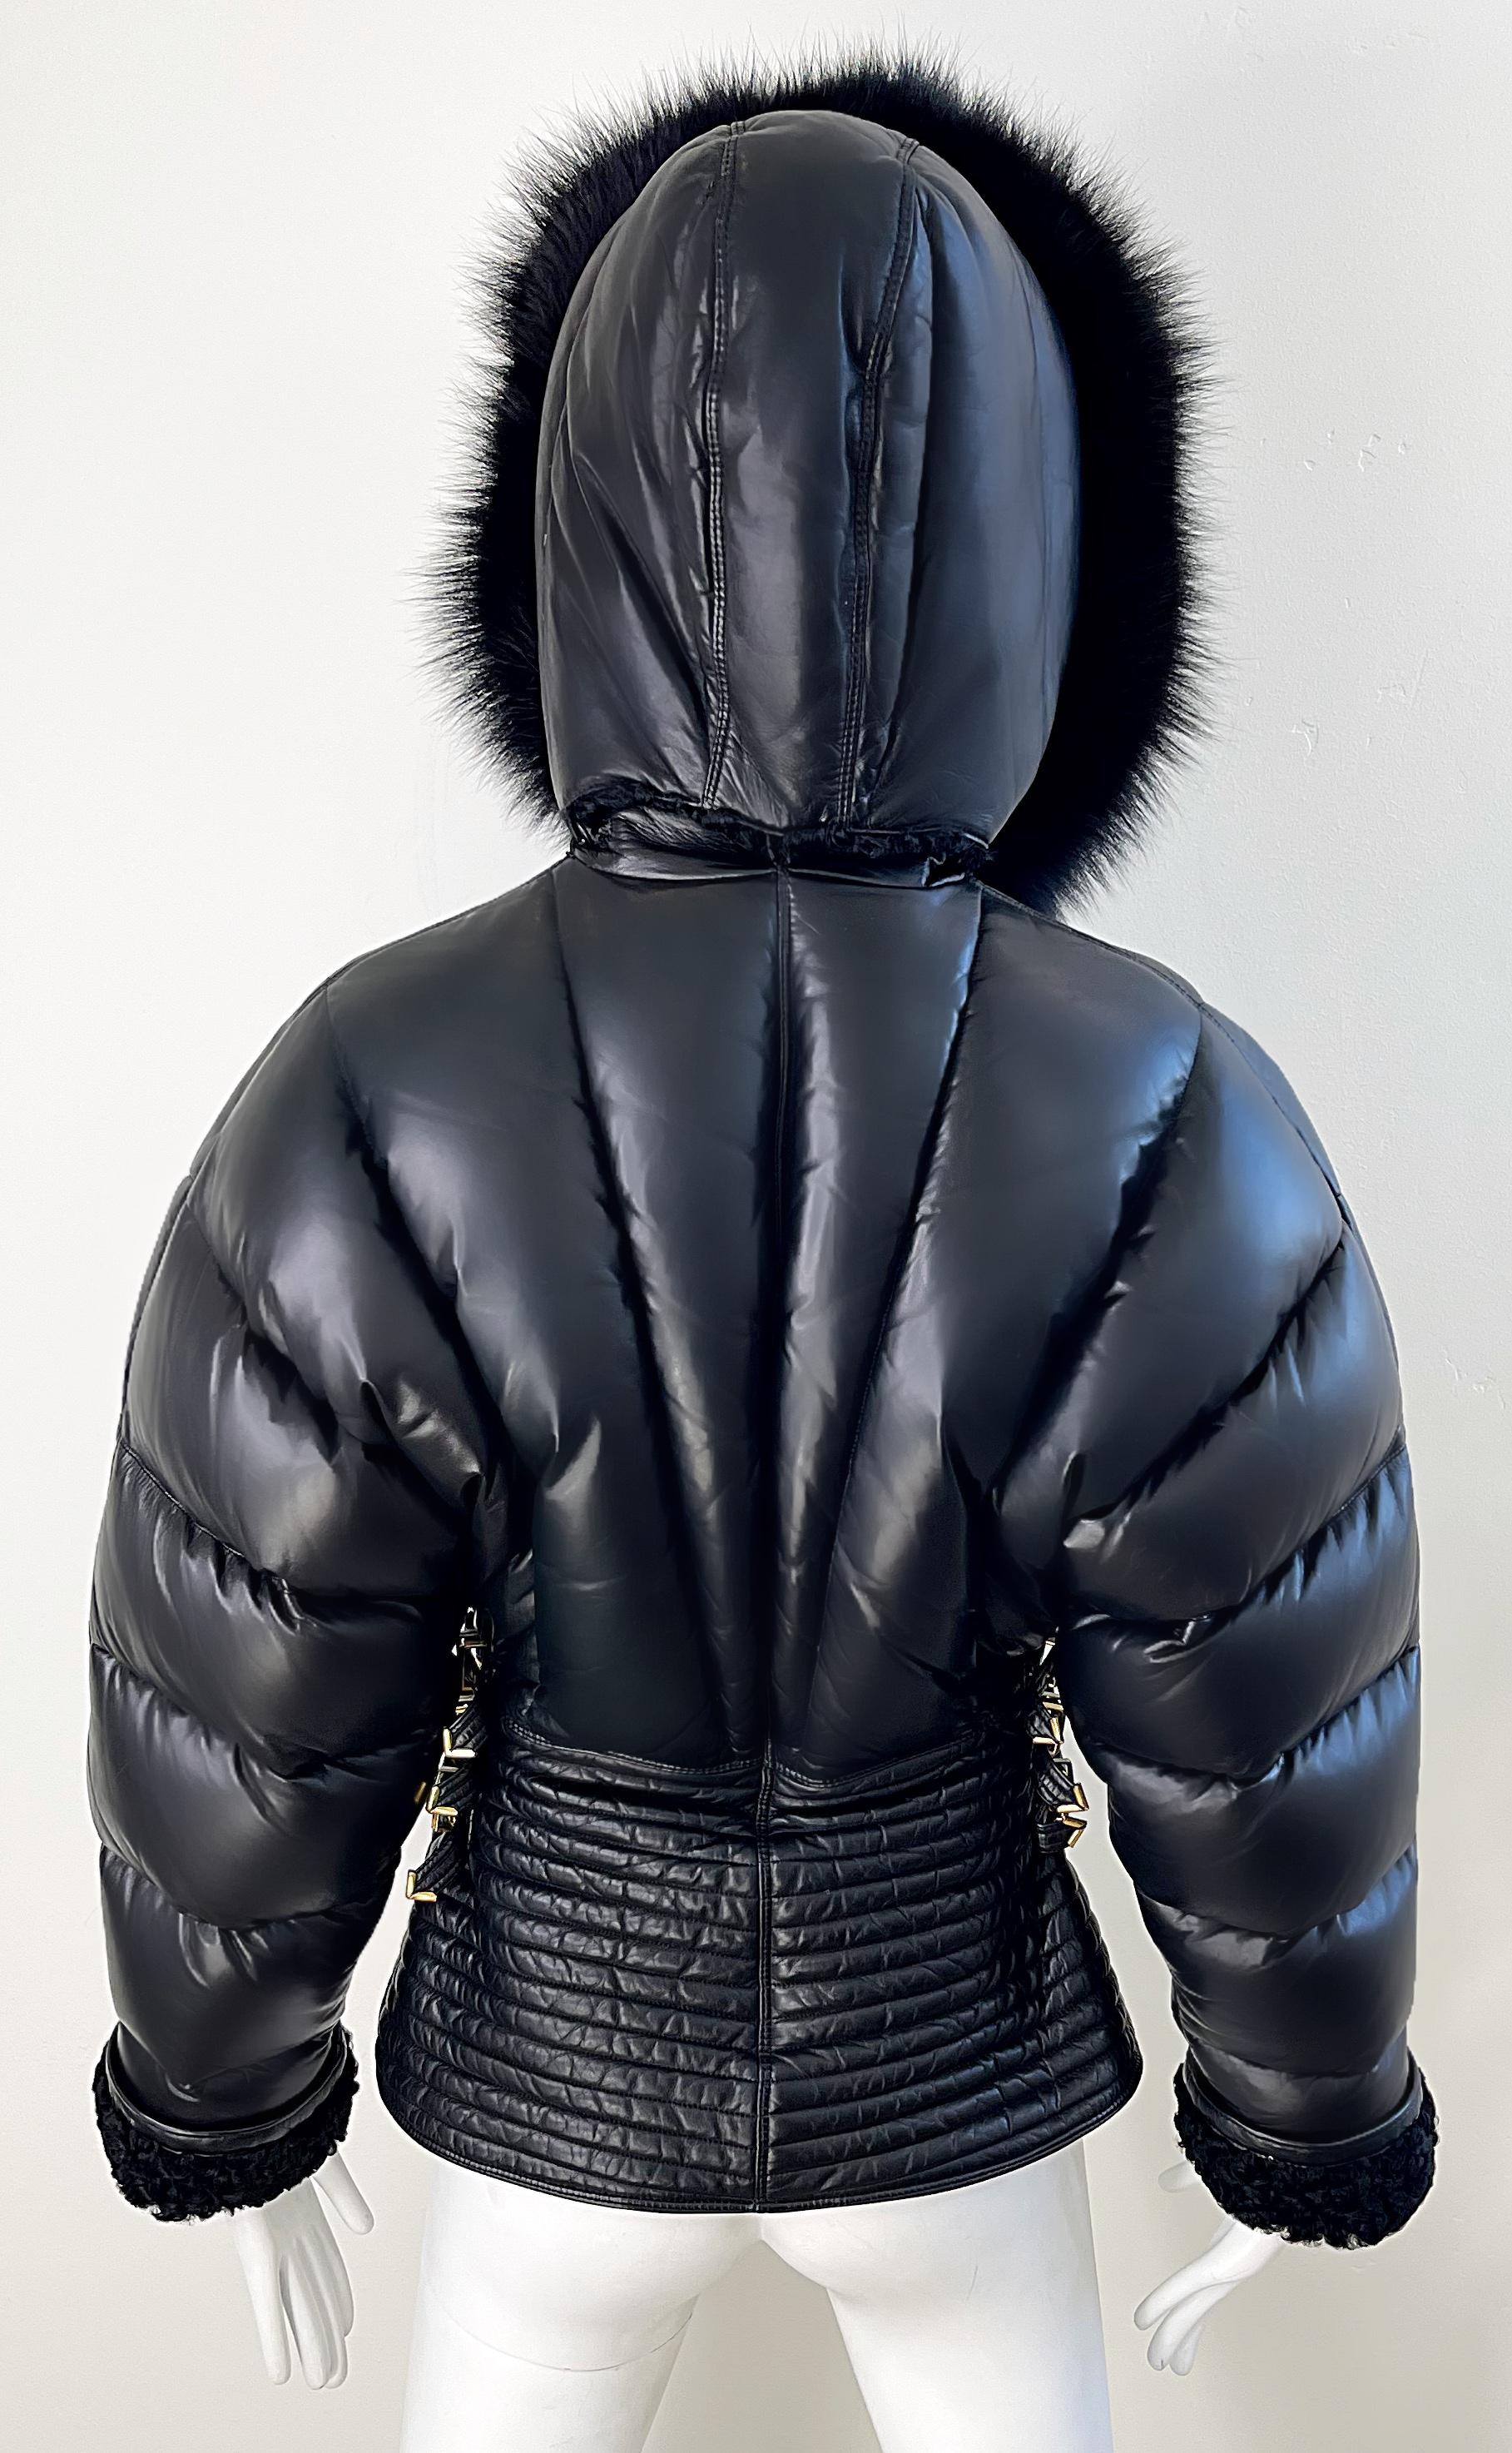 Gianni Versace Runway F/W 1992 Bondage Collection Leather Fox Astrakhan Jacket For Sale 4